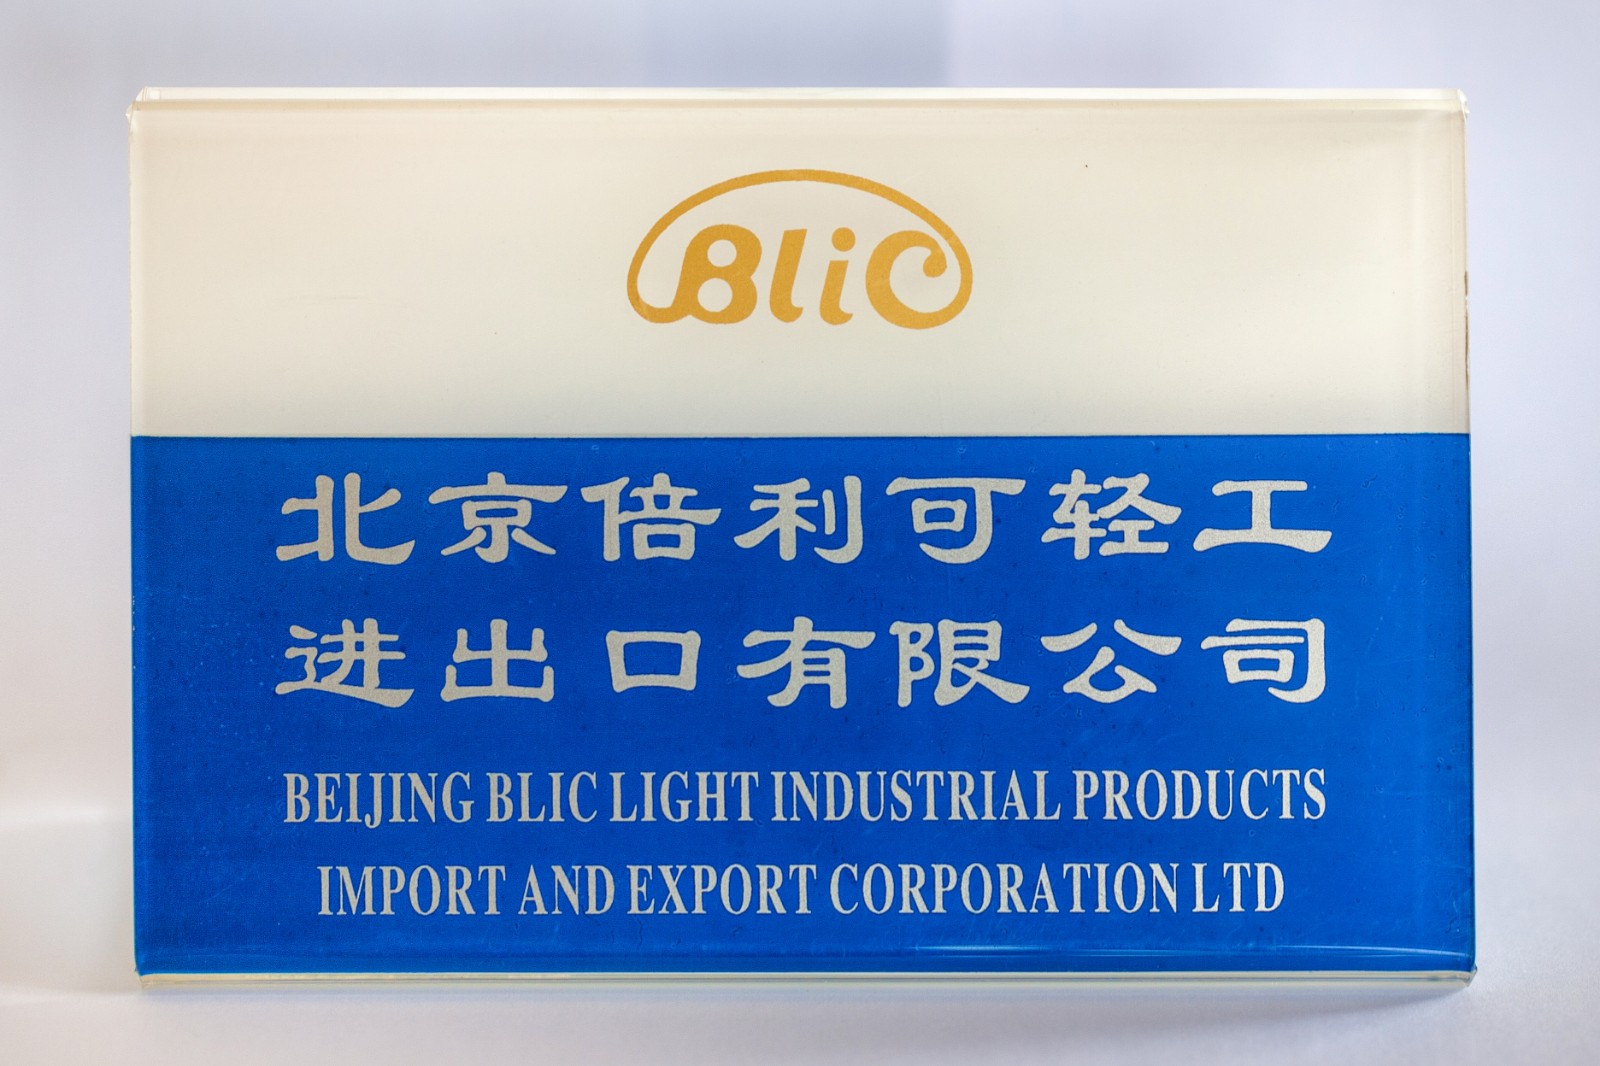 BEIJING BLIC LIGHT INDUSTRIAL PRODUCTS IMPORT AND EXPORT CORPORATION LTD.